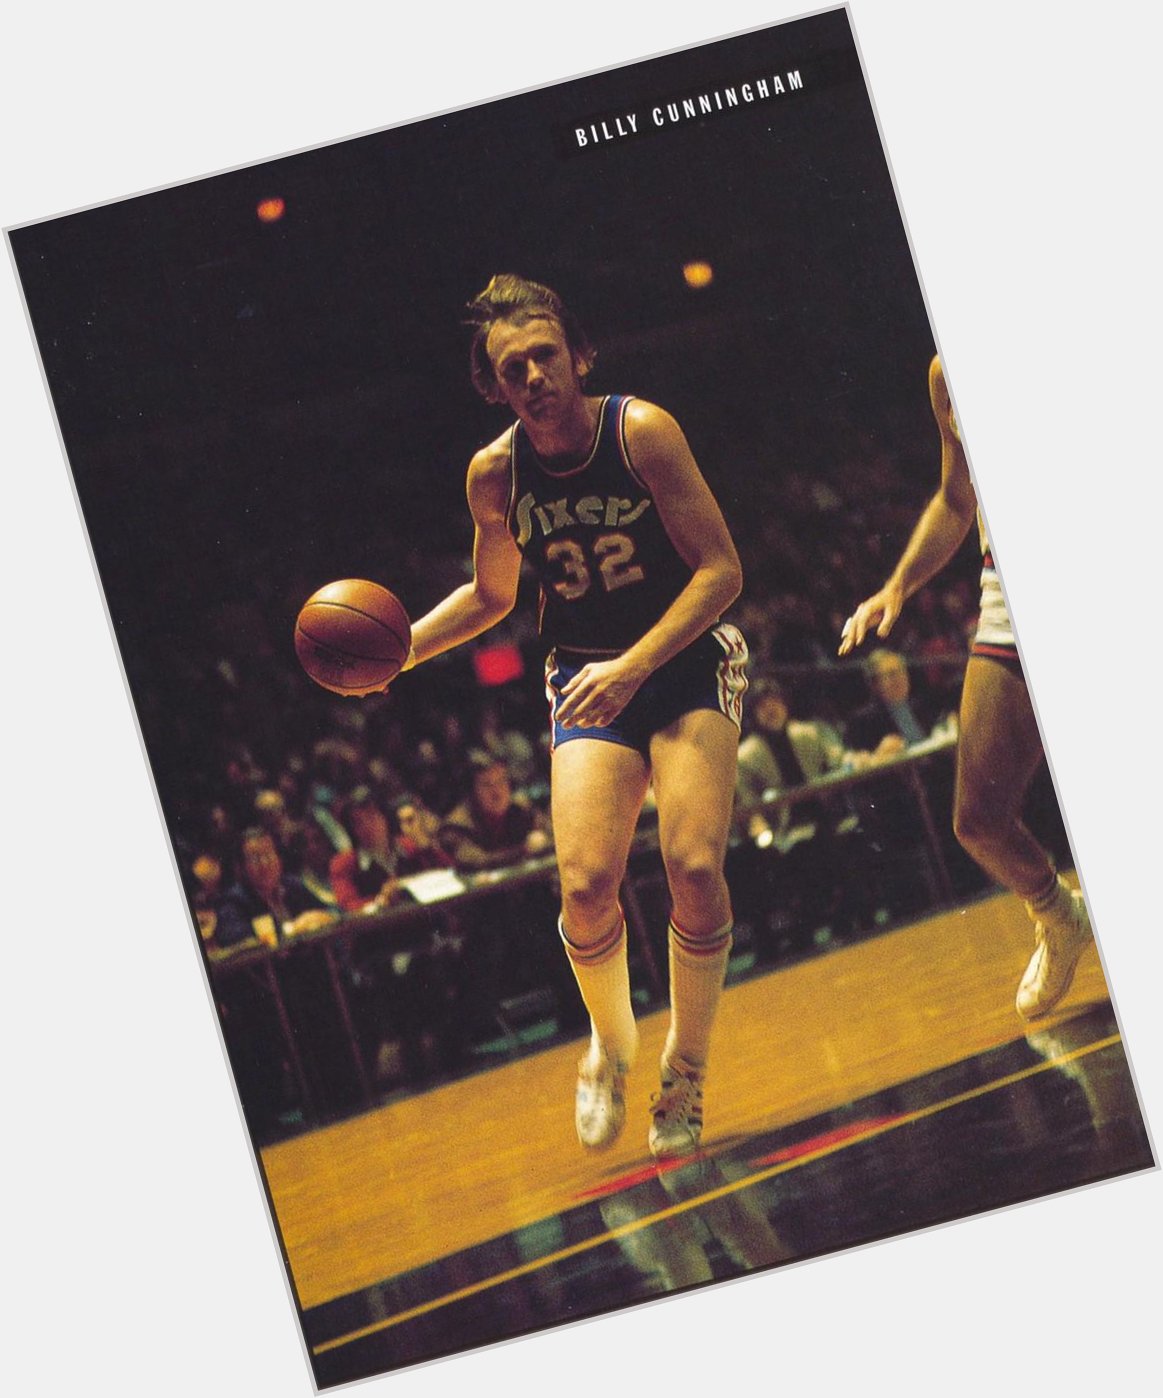 Happy Birthday to Billy Cunningham, who turns 73 today! 